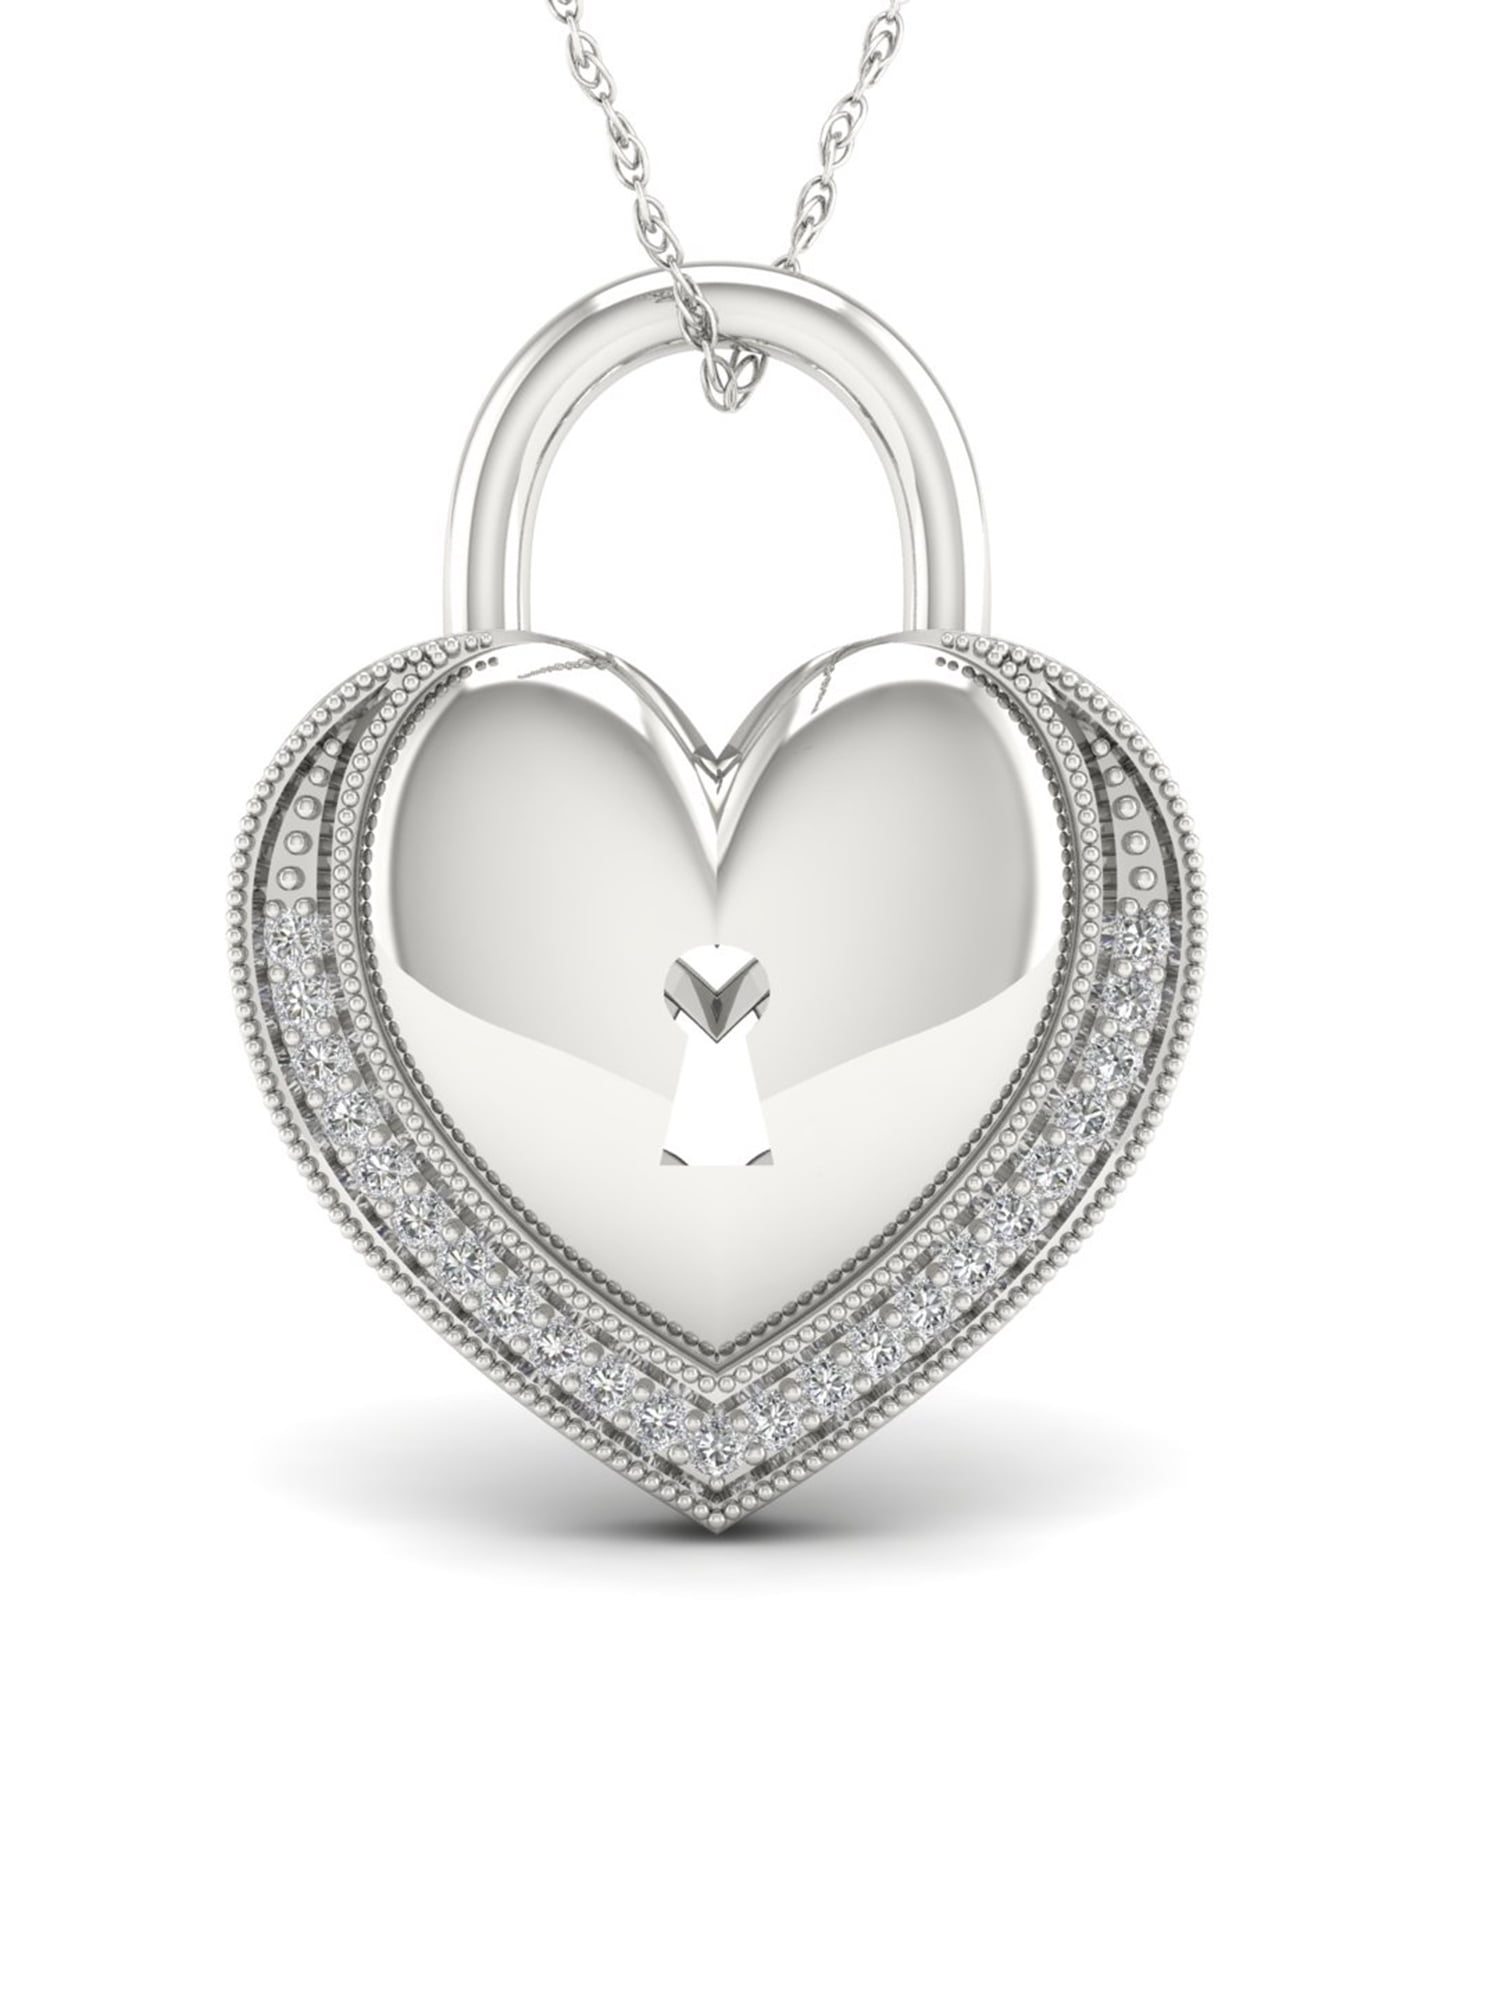 H-I,I3 Sterling Silver 1/10ct TDW Diamond Heart MOM Necklace